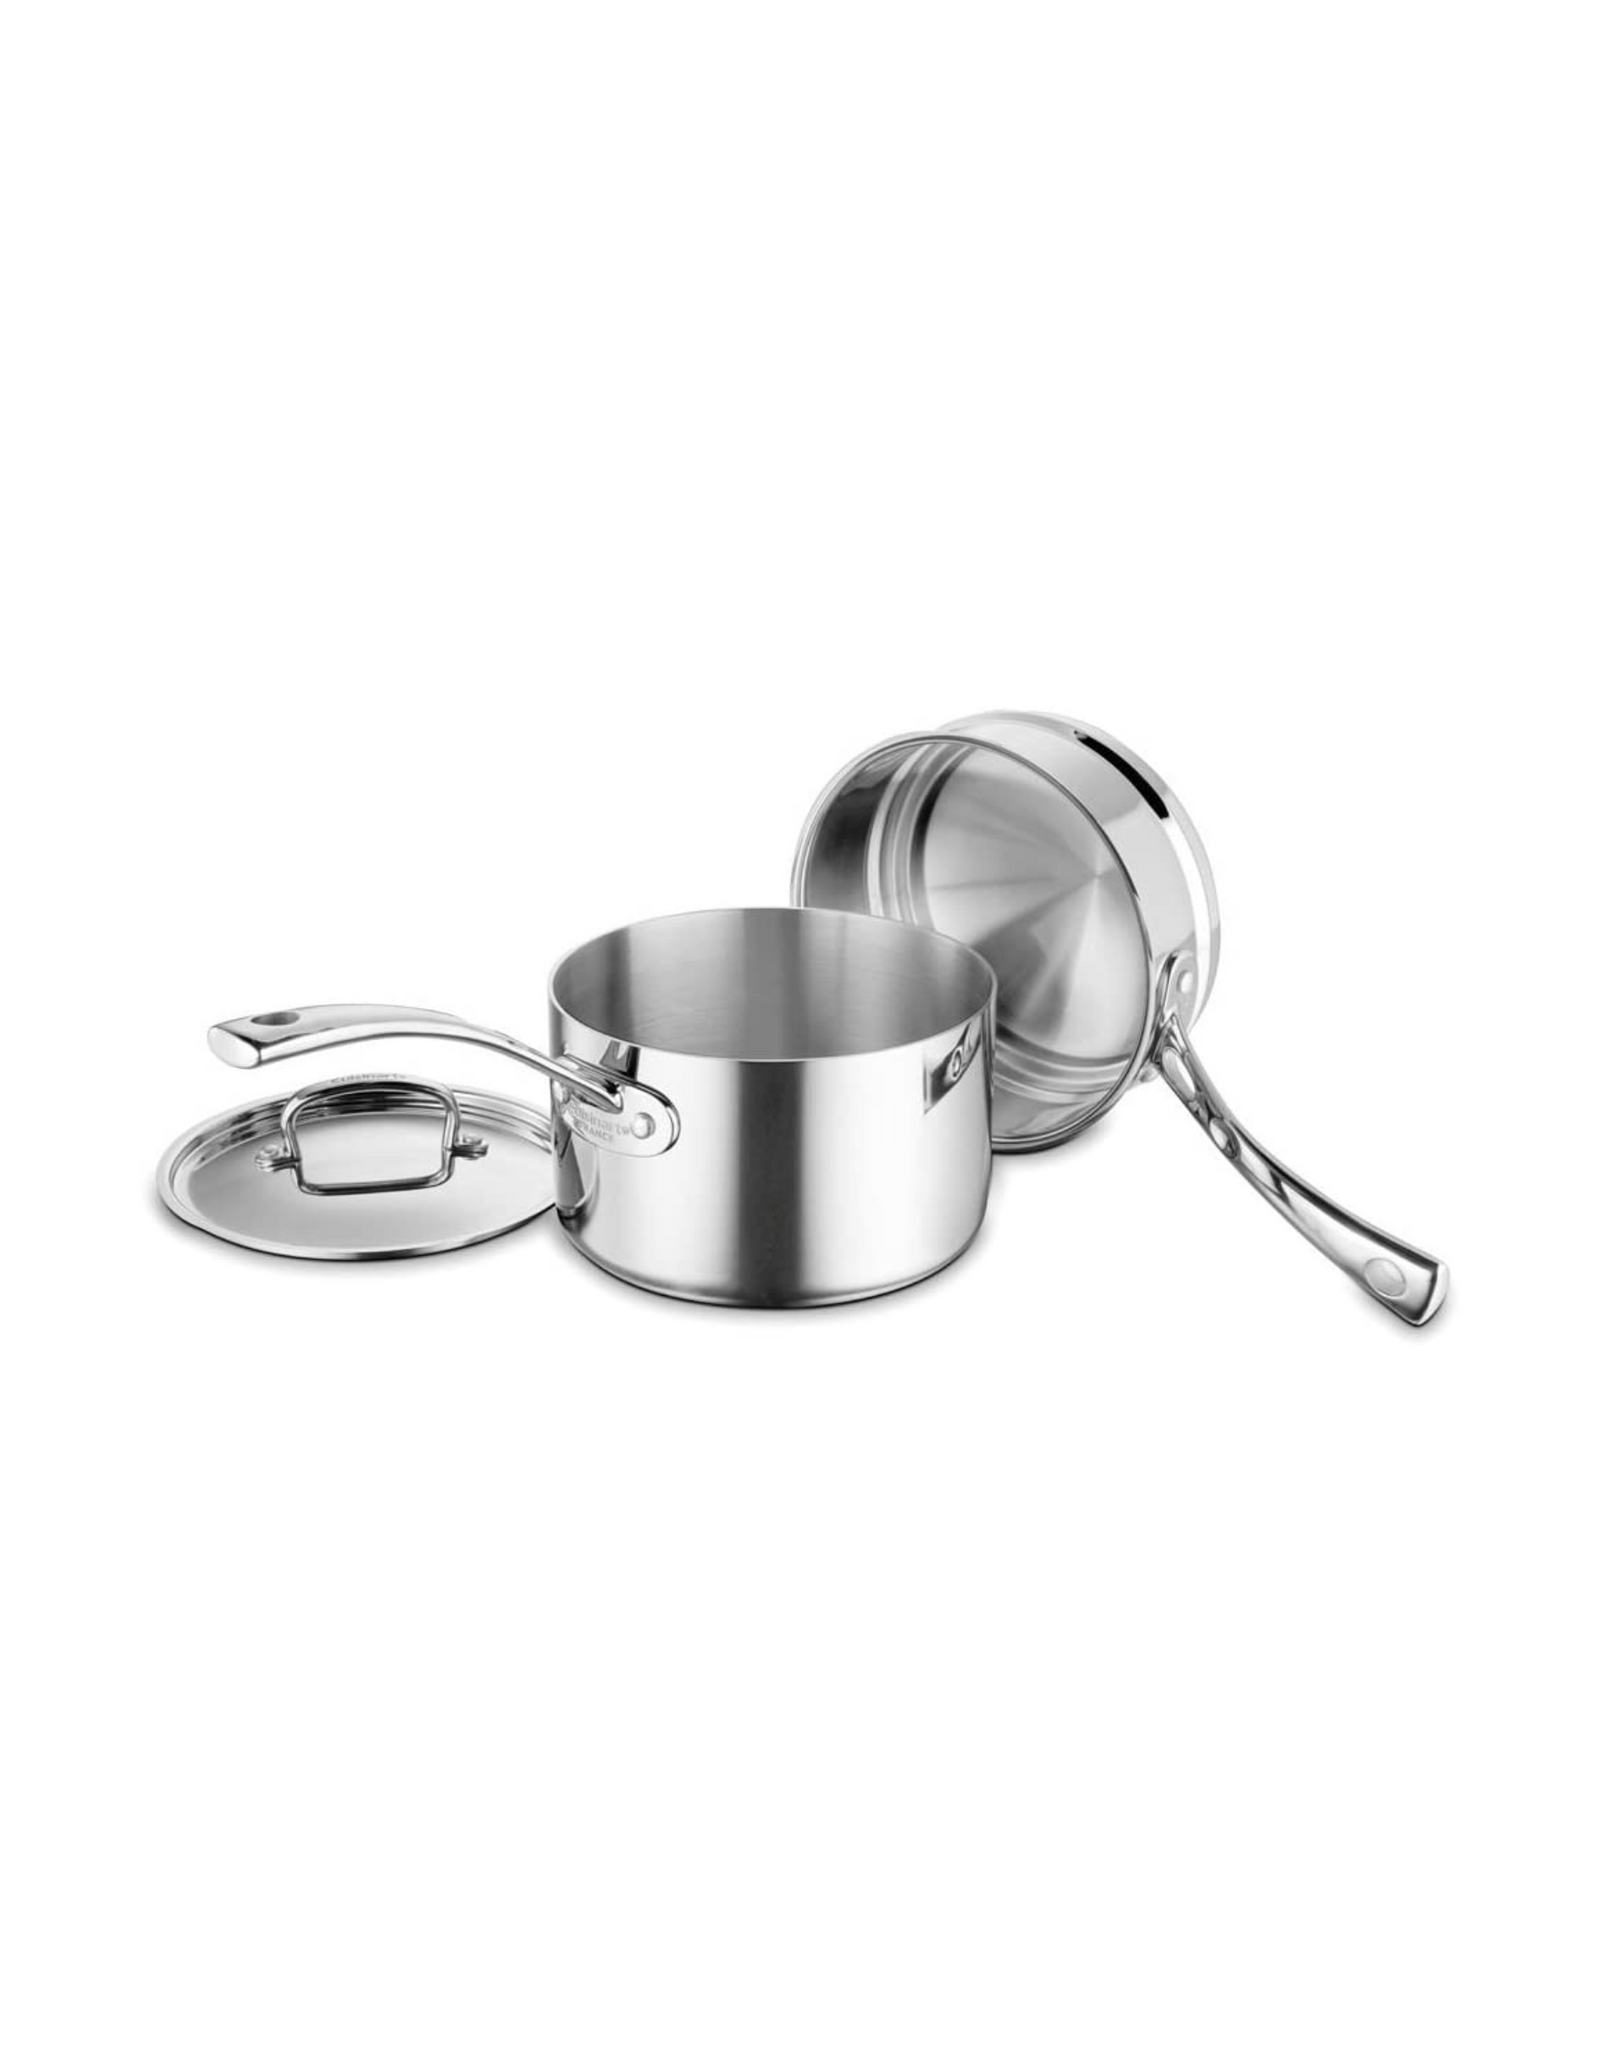 Cuisinart French Classic Tri-Ply Stainless Saucepan and Double Boiler Set, 3-Pieces